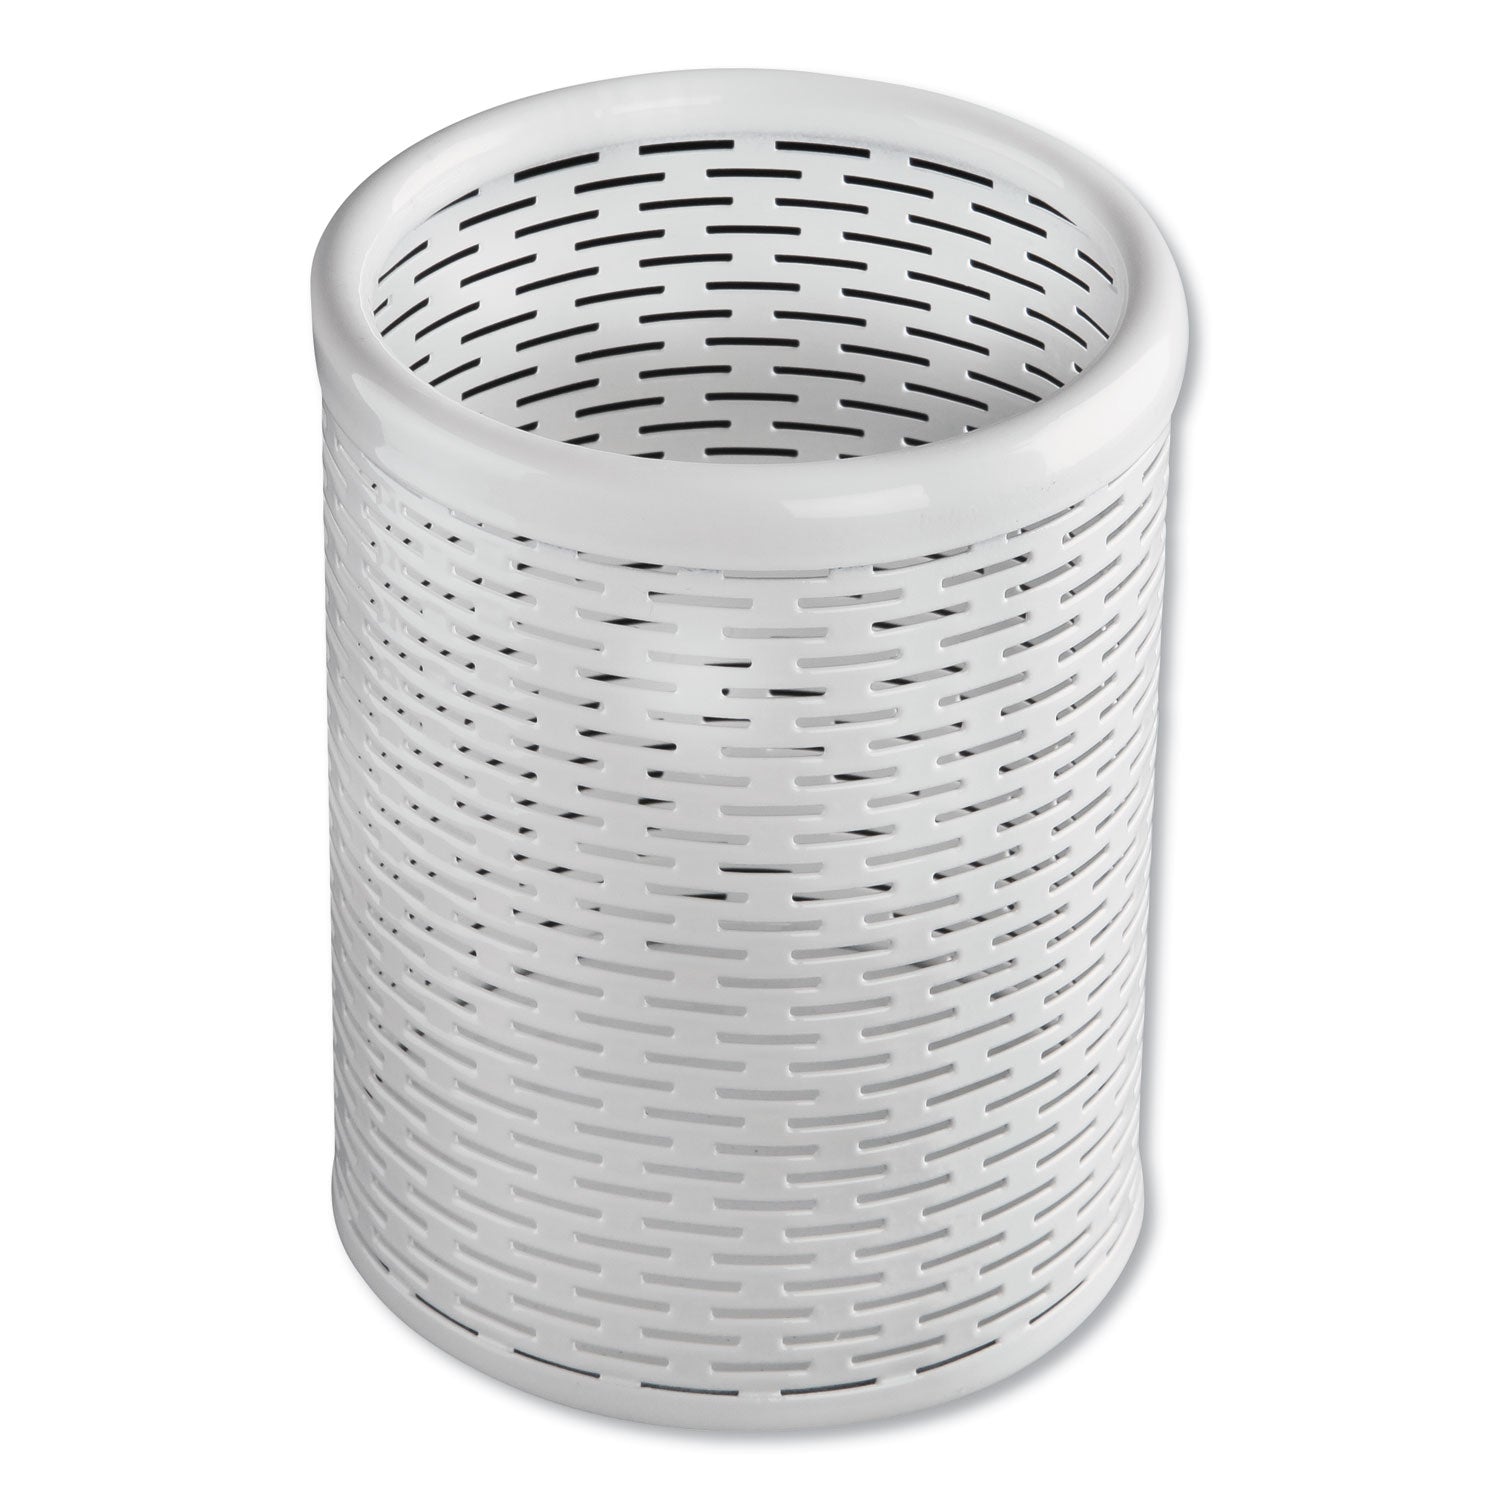 urban-collection-punched-metal-pencil-cup-35-diameter-x-45h-white_aopart20005wh - 2